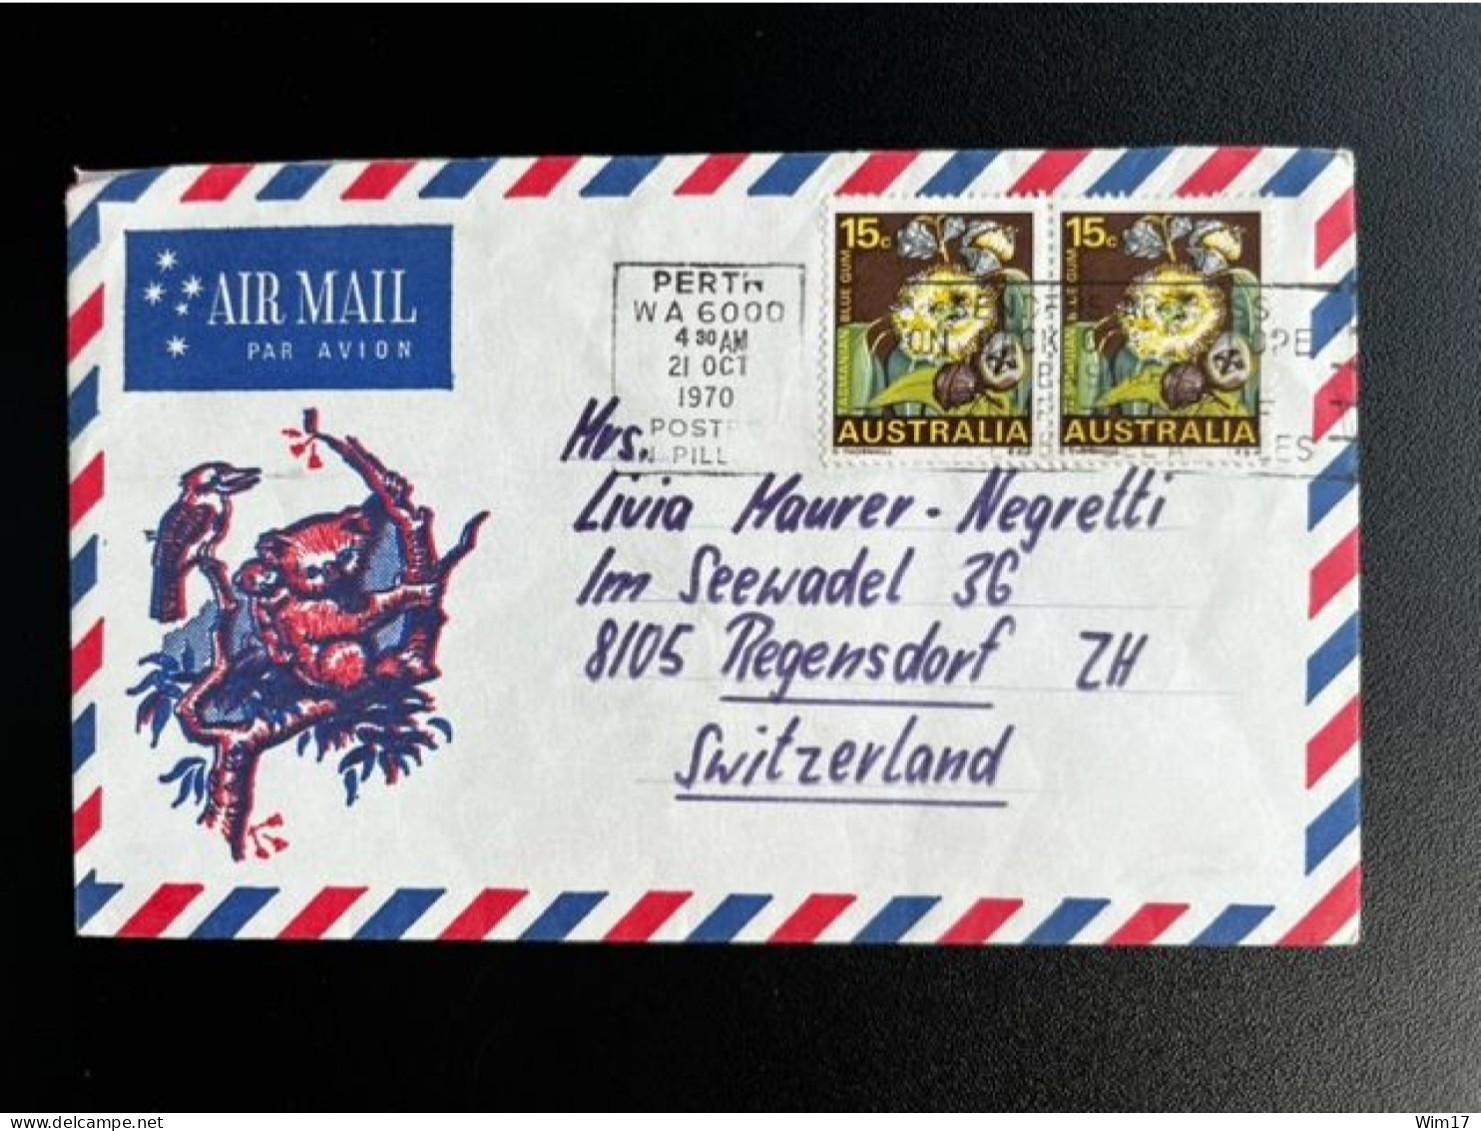 AUSTRALIA 1970 AIR MAIL LETTER PERTH TO REGENSDORF 21-10-1970 AUSTRALIE - Covers & Documents